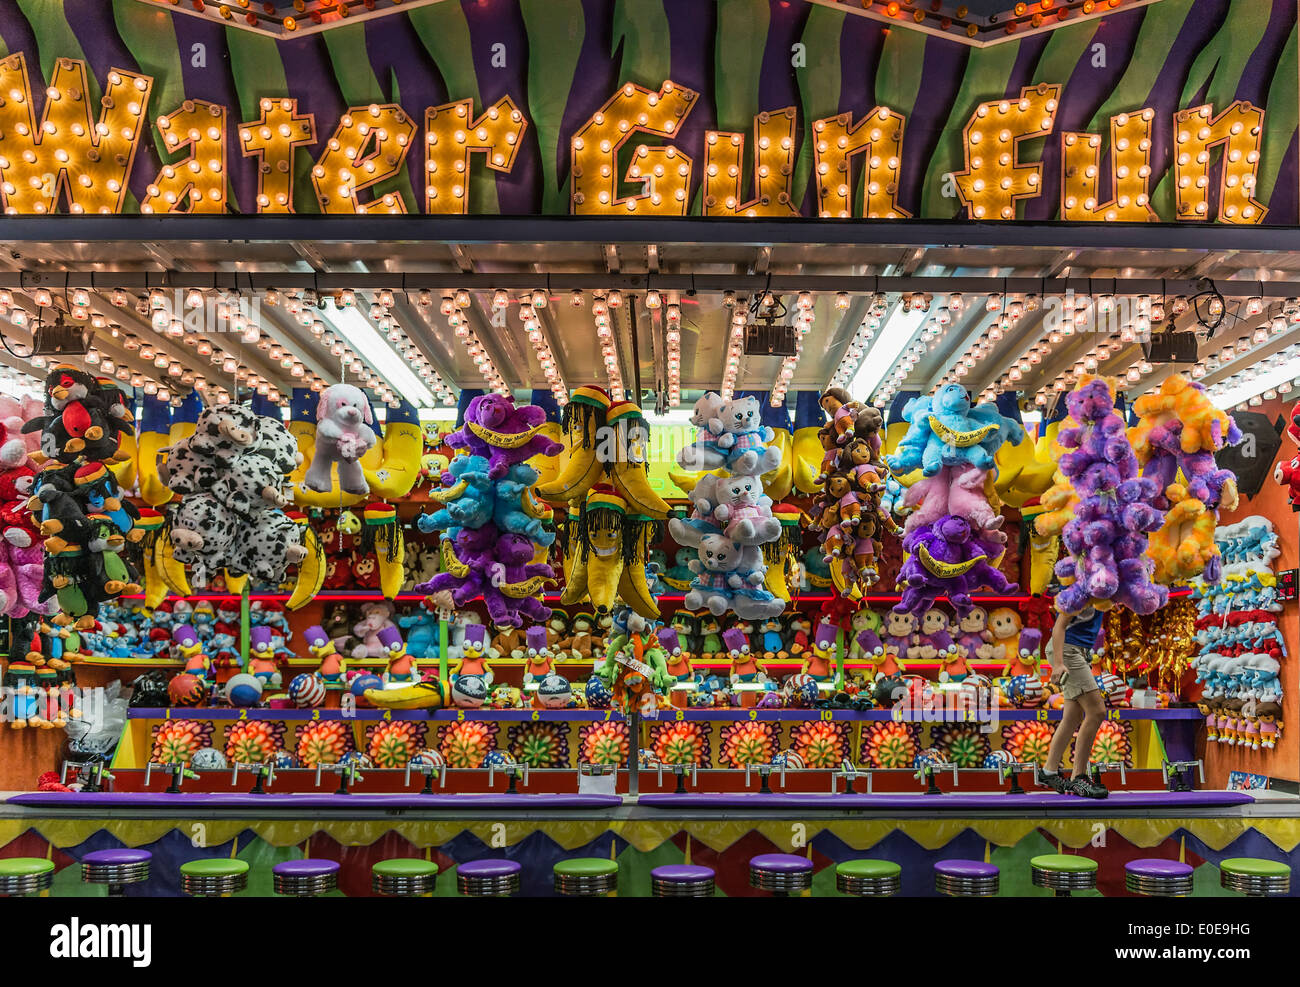 Stuffed animals prizes at a carnival booth water gun game. Stock Photo